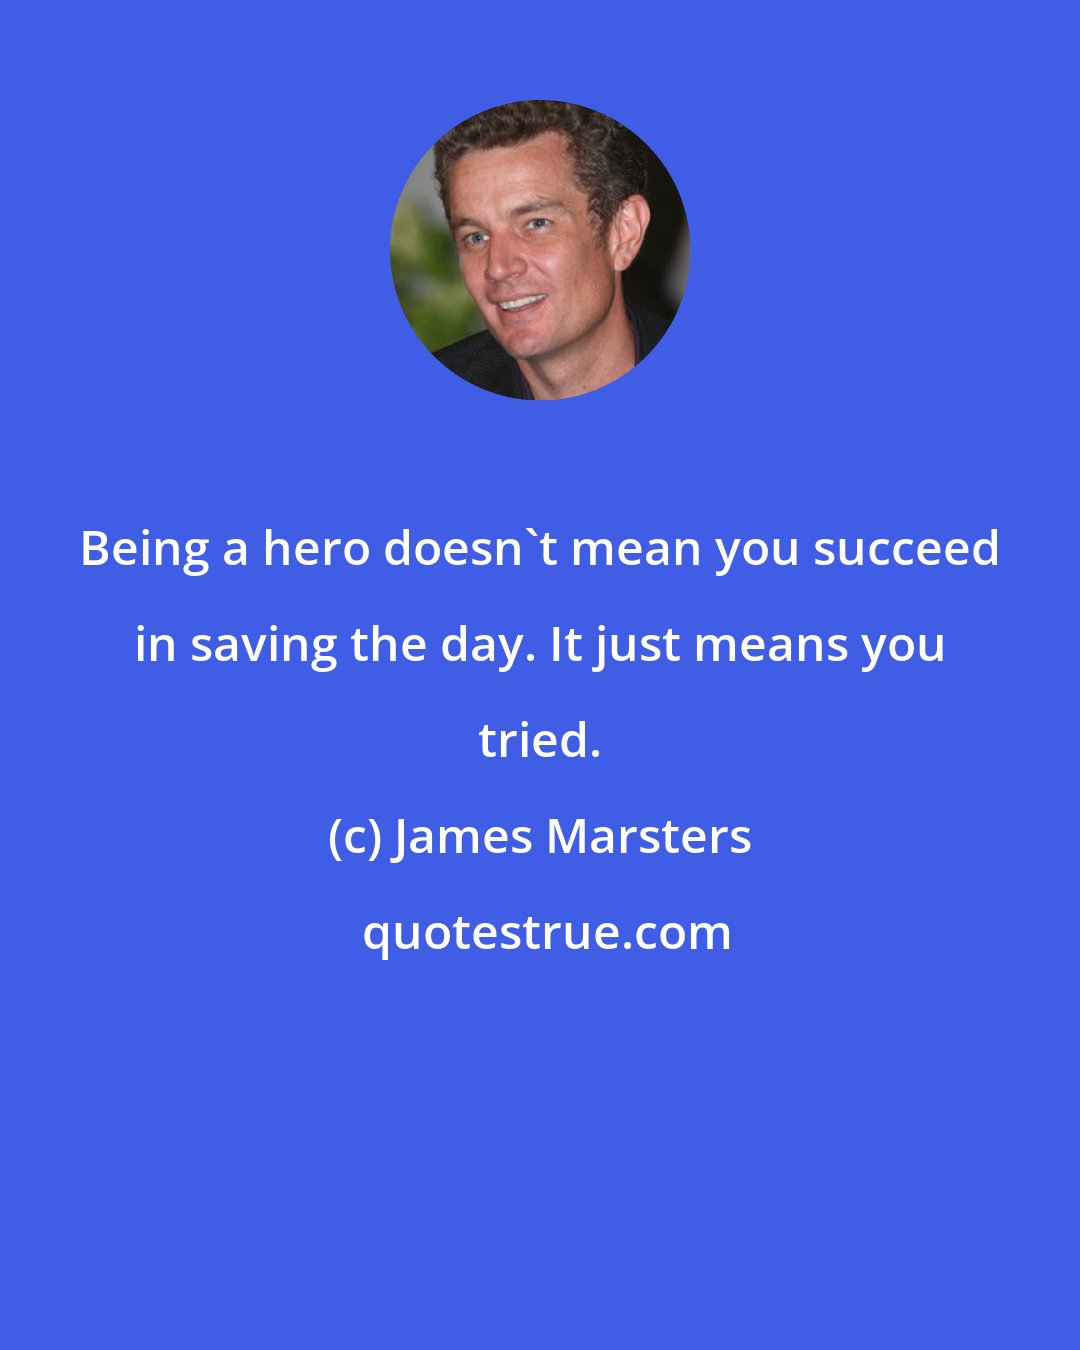 James Marsters: Being a hero doesn't mean you succeed in saving the day. It just means you tried.